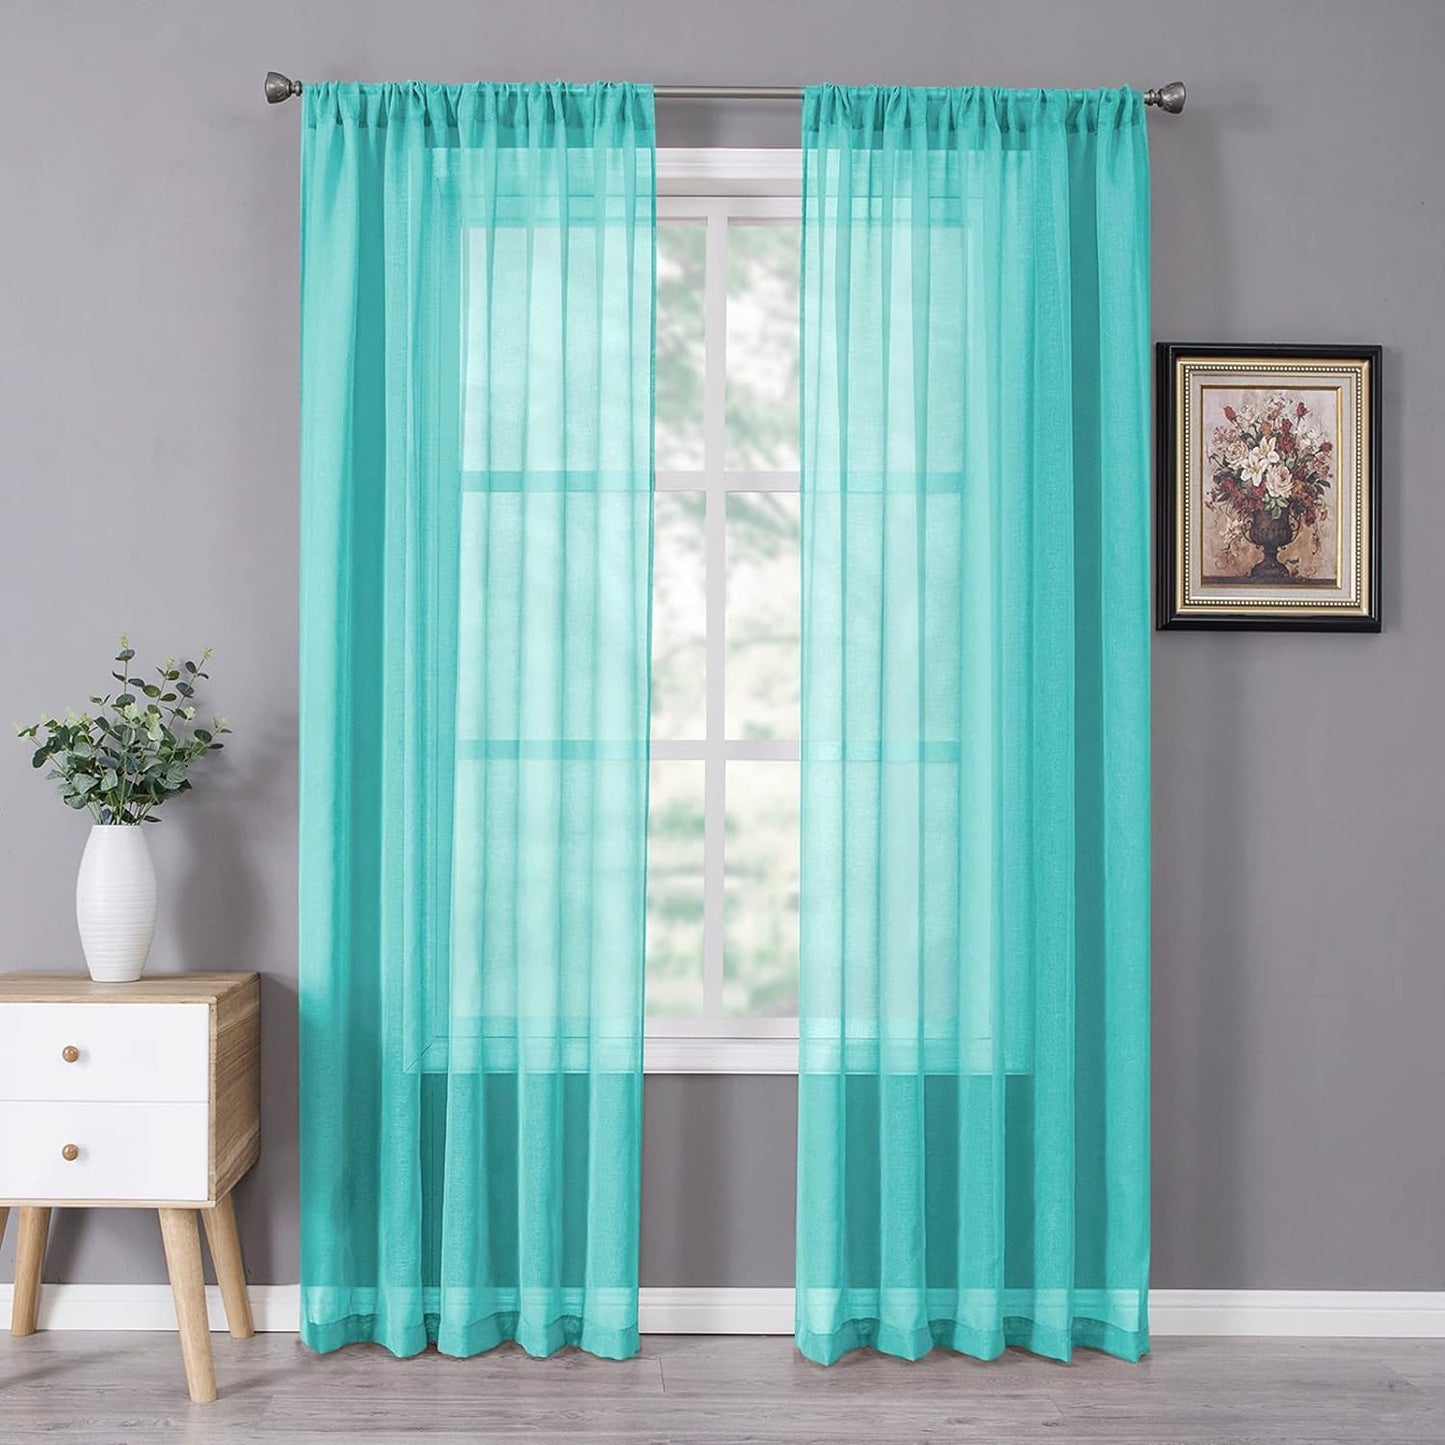 Tollpiz Short Sheer Curtains Linen Textured Bedroom Curtain Sheers Light Filtering Rod Pocket Voile Curtains for Living Room, 54 X 45 Inches Long, White, Set of 2 Panels  Tollpiz Tex Aqua Blue 54"W X 95"L 